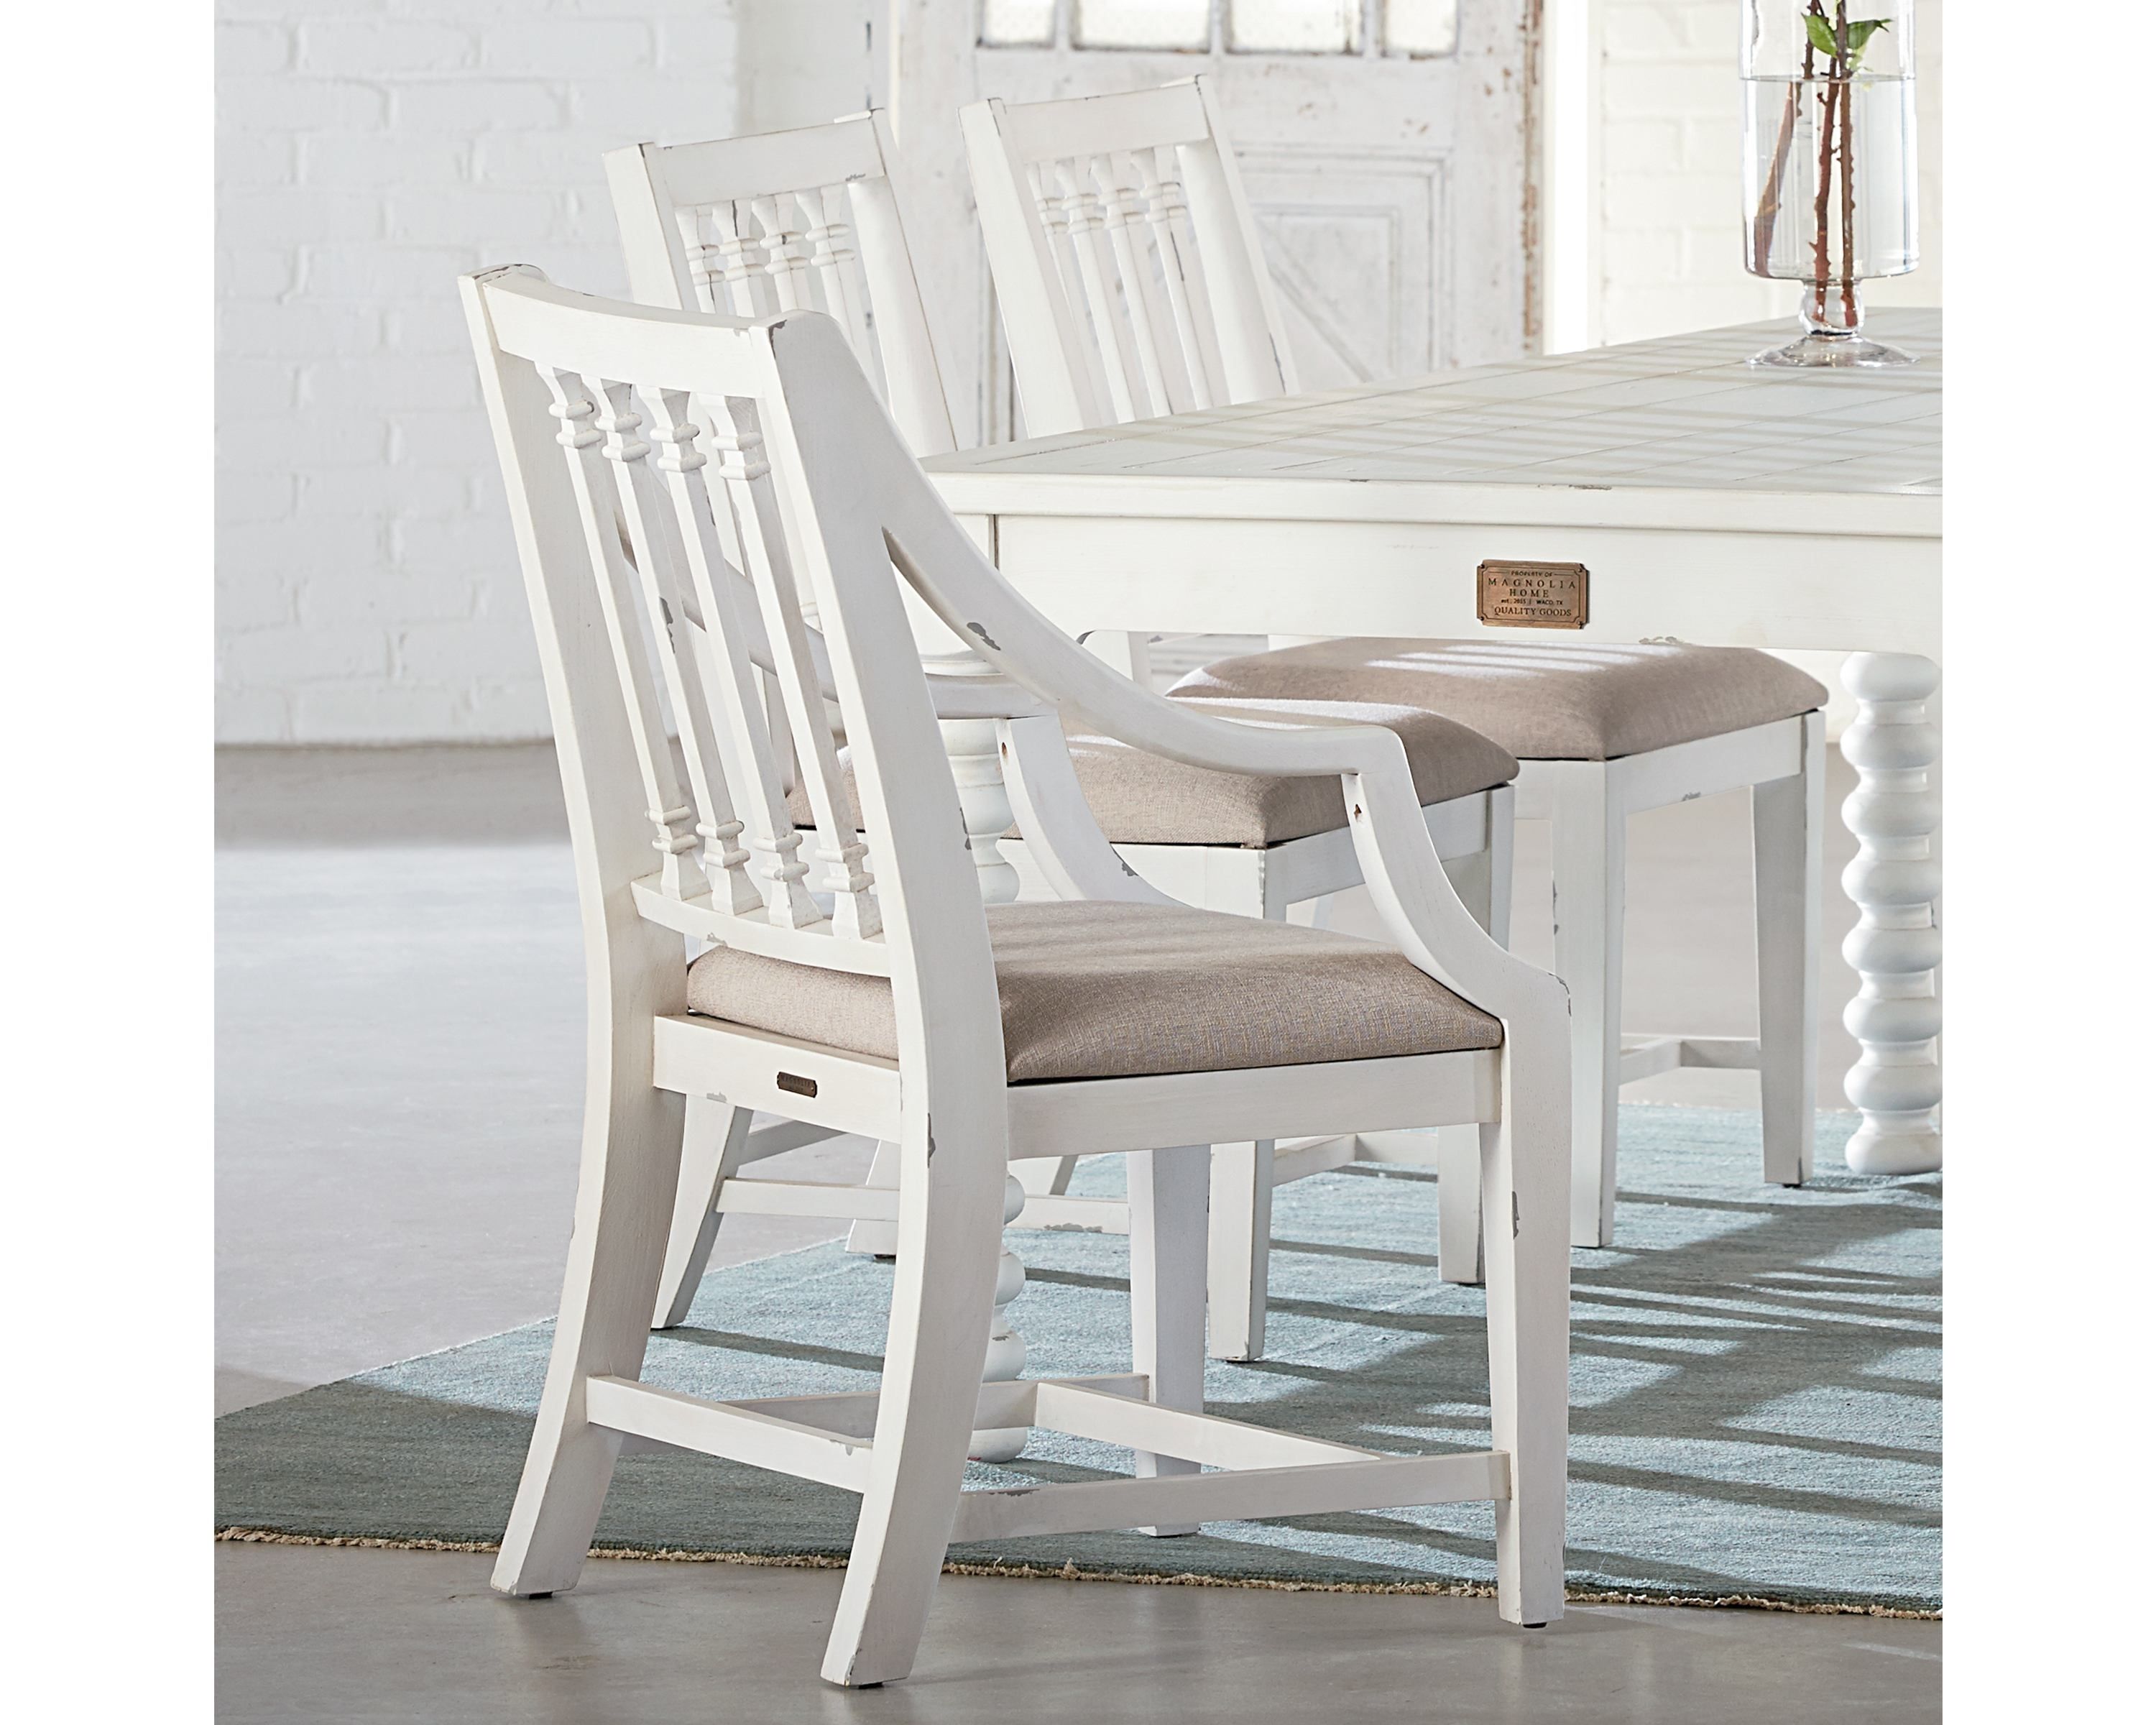 Magnolia Home Revival Jo's White Arm Chairs With Regard To Most Popular Revival Arm Chair – Magnolia Home (Photo 1 of 20)